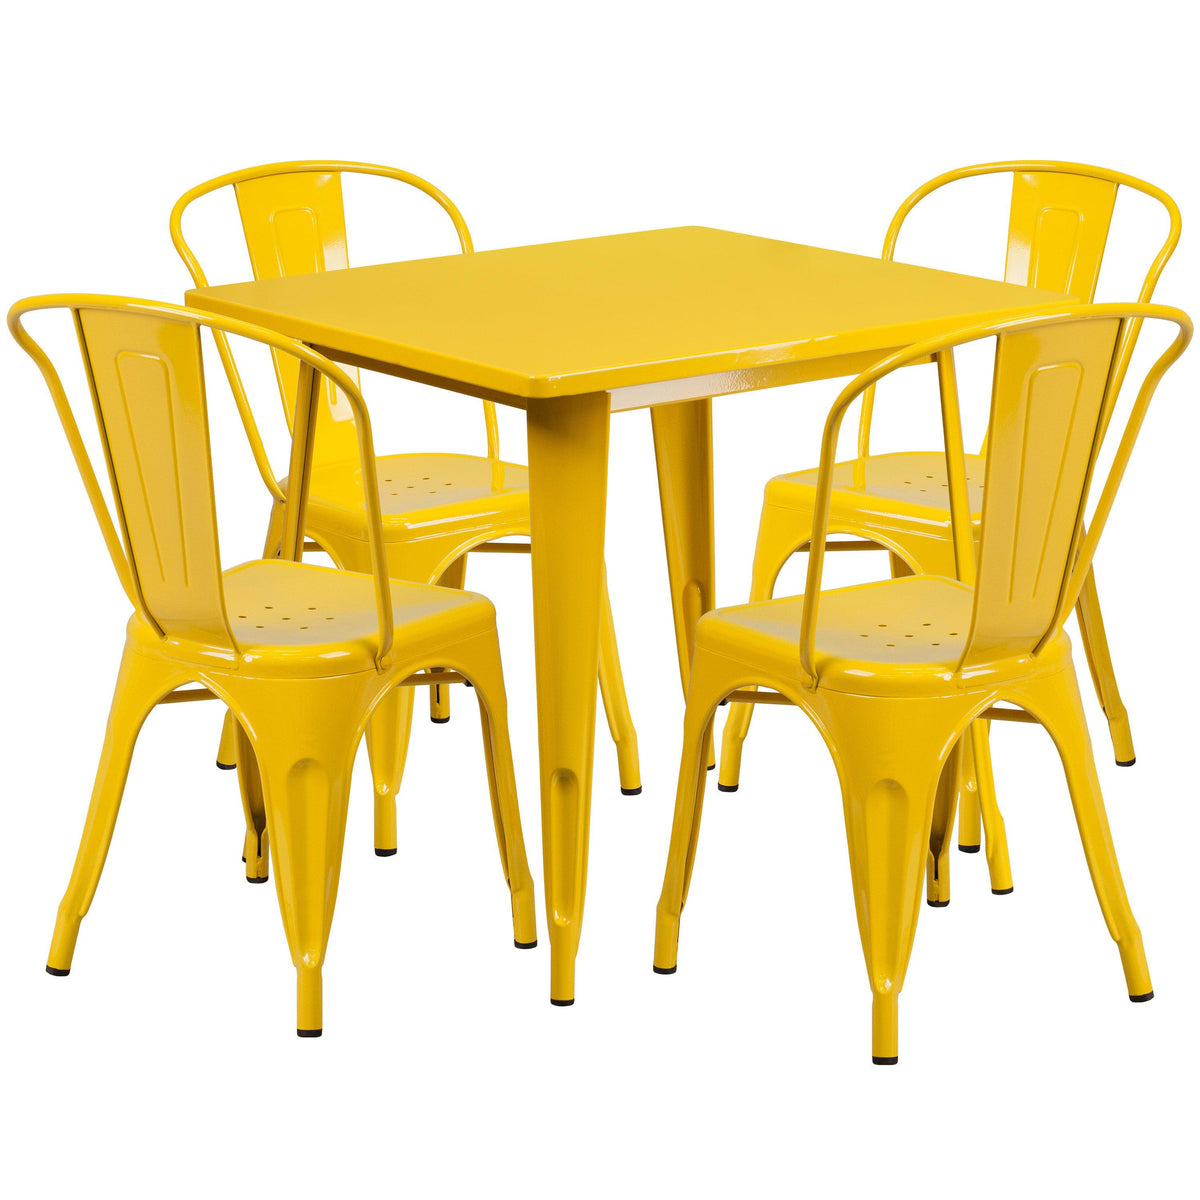 Yellow |#| 31.5inch Square Yellow Metal Indoor-Outdoor Table Set with 4 Stack Chairs